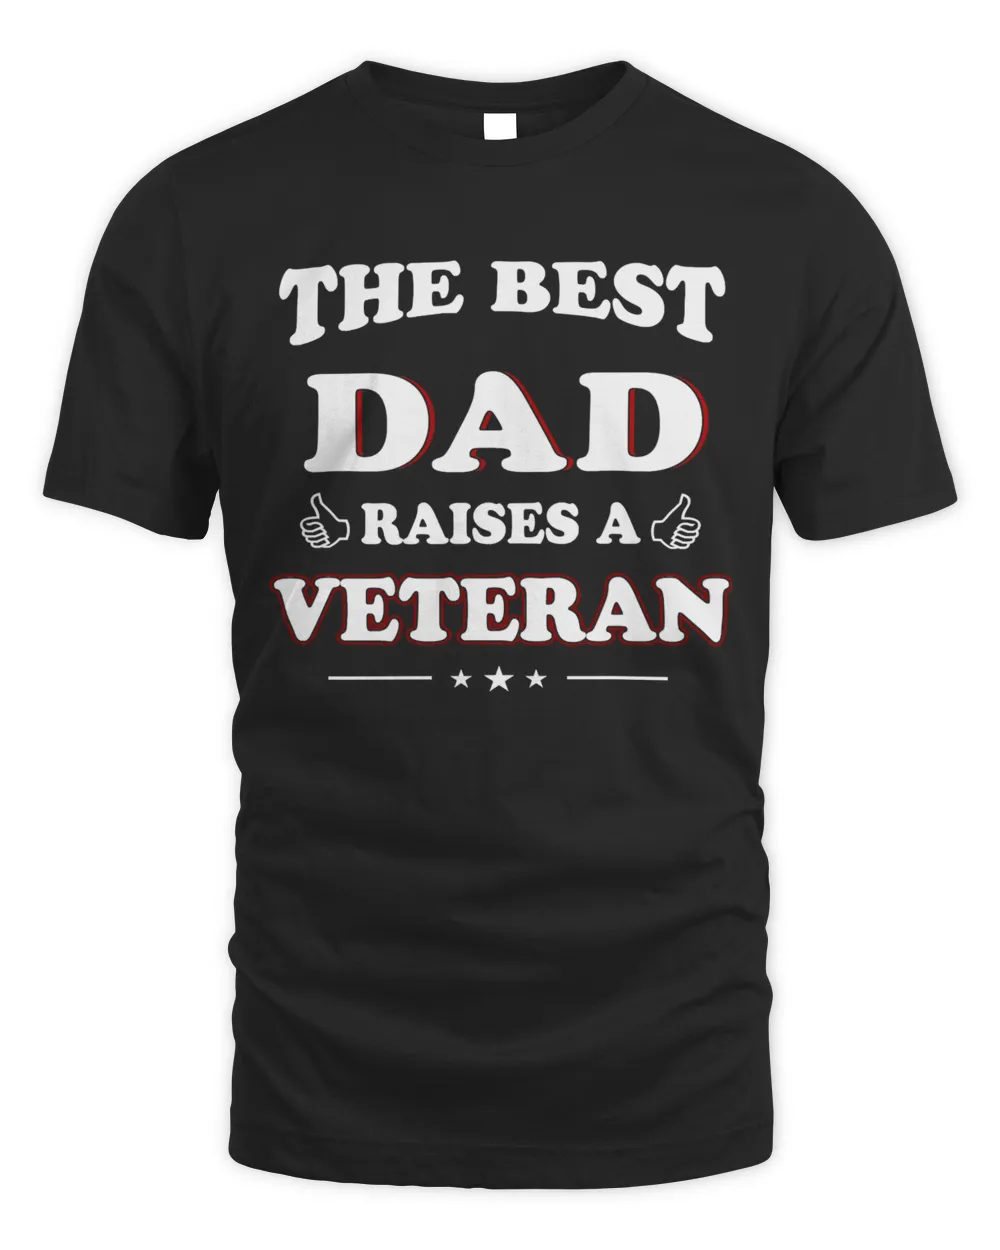 Veteran Veterans Day The Best Dad Raises A VeteranFathers Day 2018 Dads 662 navy soldier army military